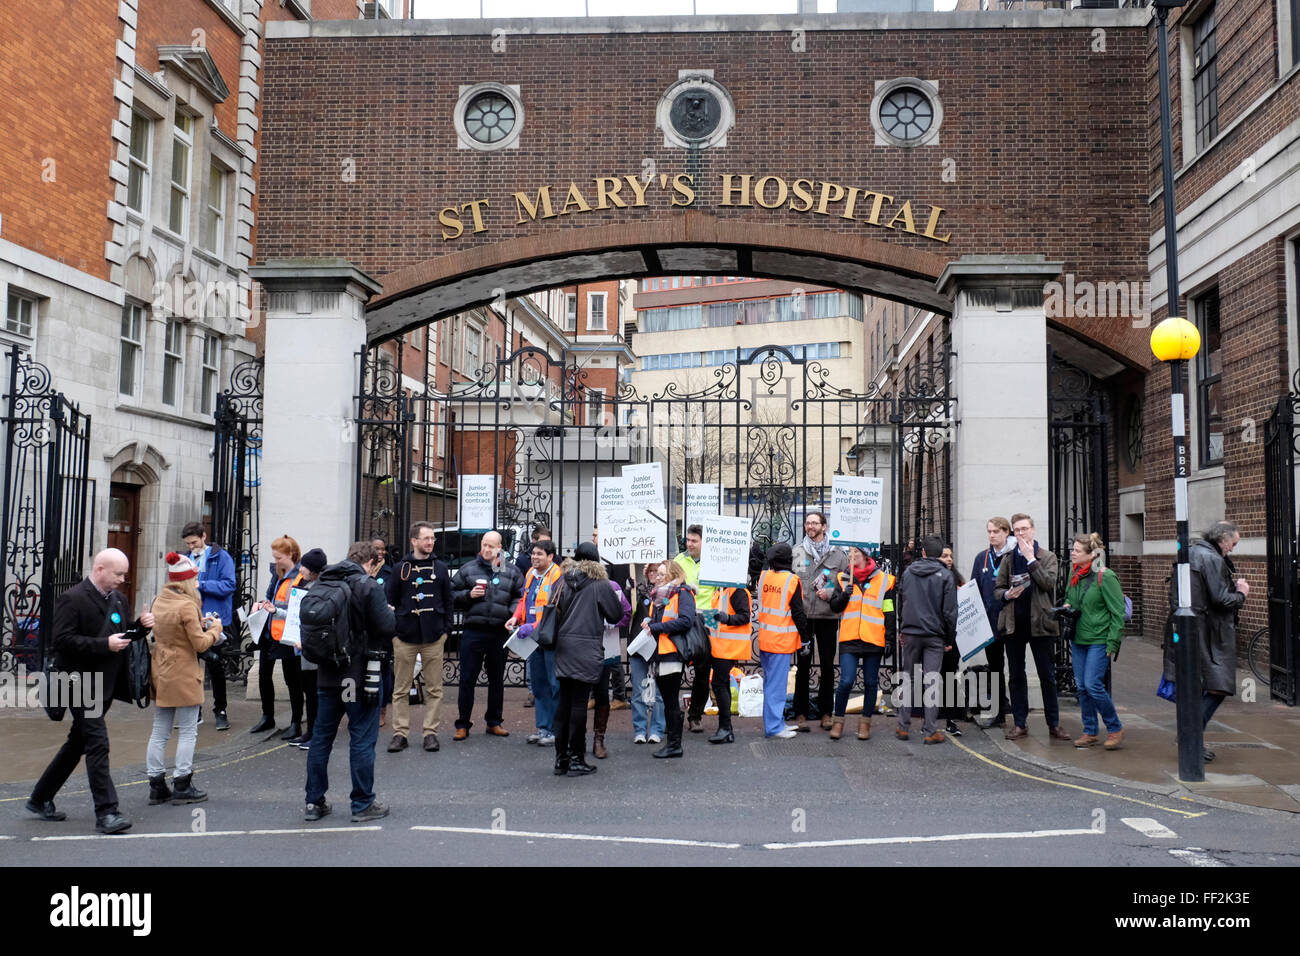 St Mary's Hospital London High Resolution Stock Photography and Images -  Alamy